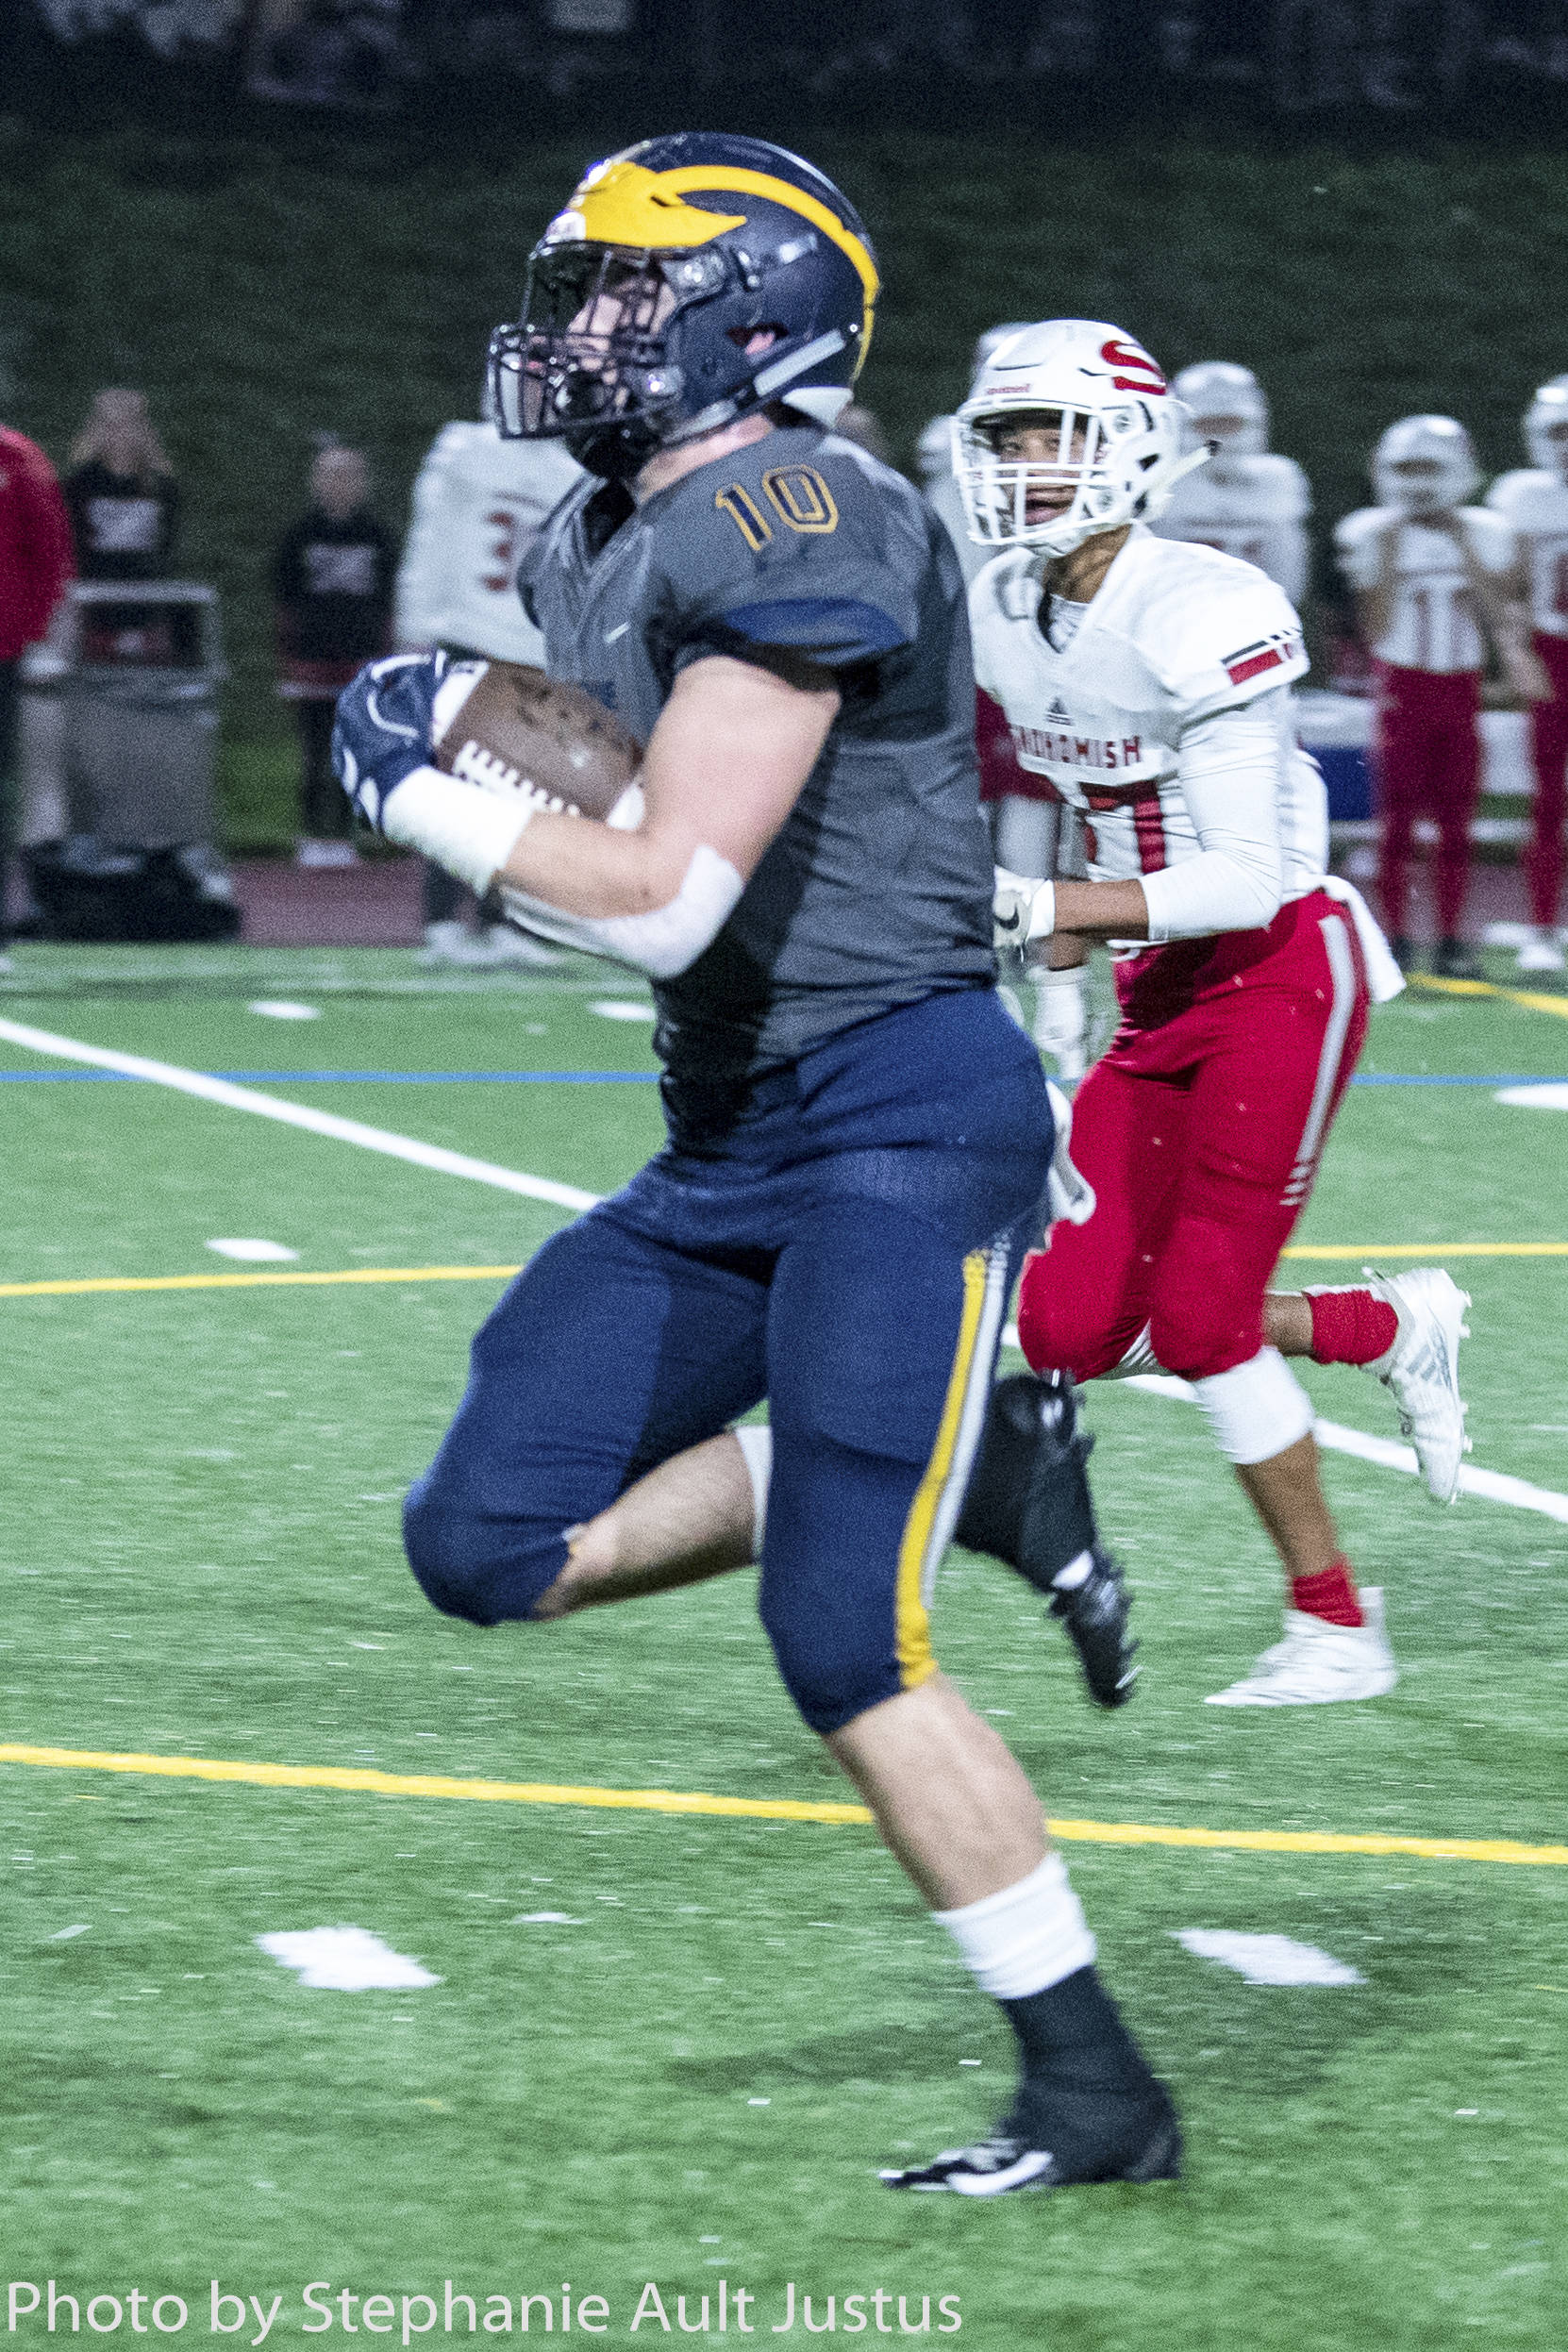 Bellevue senior running back Drew Fowler (pictured) busted loose for a 73-yard touchdown run and a 36-yard touchdown run against Snohomish in the first round of the Class 3A state playoffs on Nov. 9. Photo courtesy of Stephanie Ault Justus